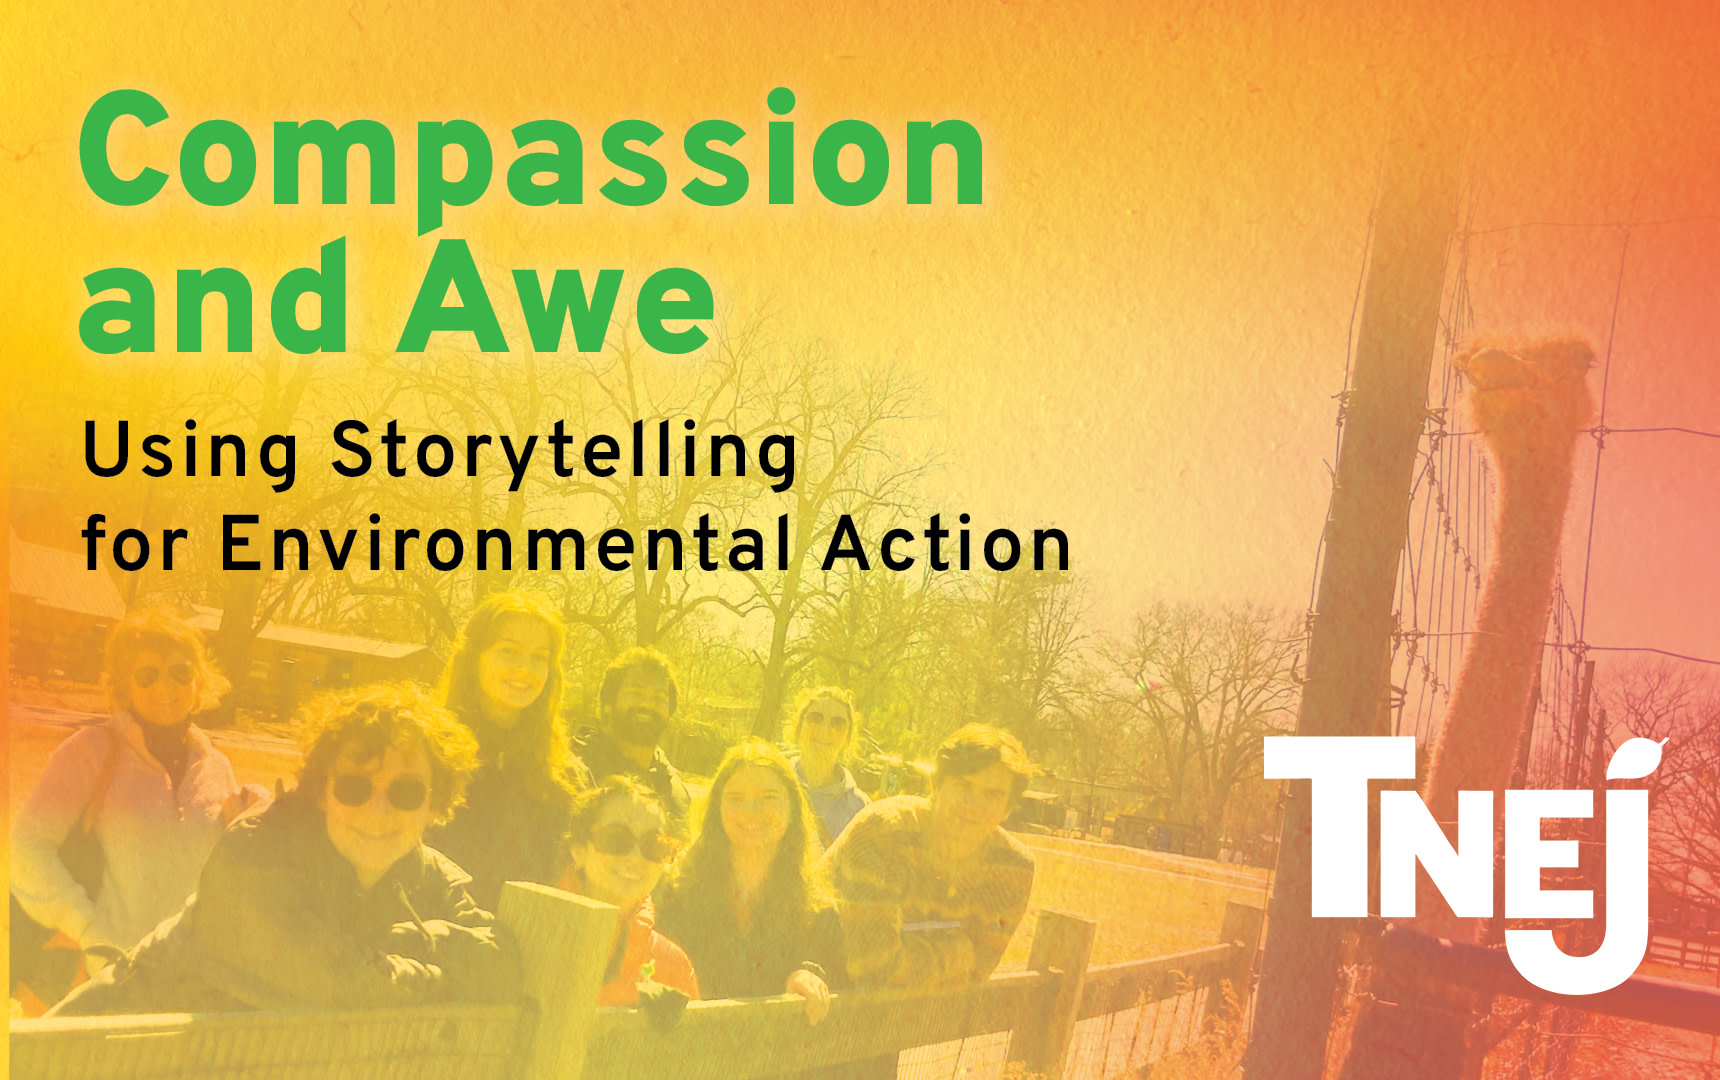 Compassion and Awe: Using Storytelling for Environmental Action